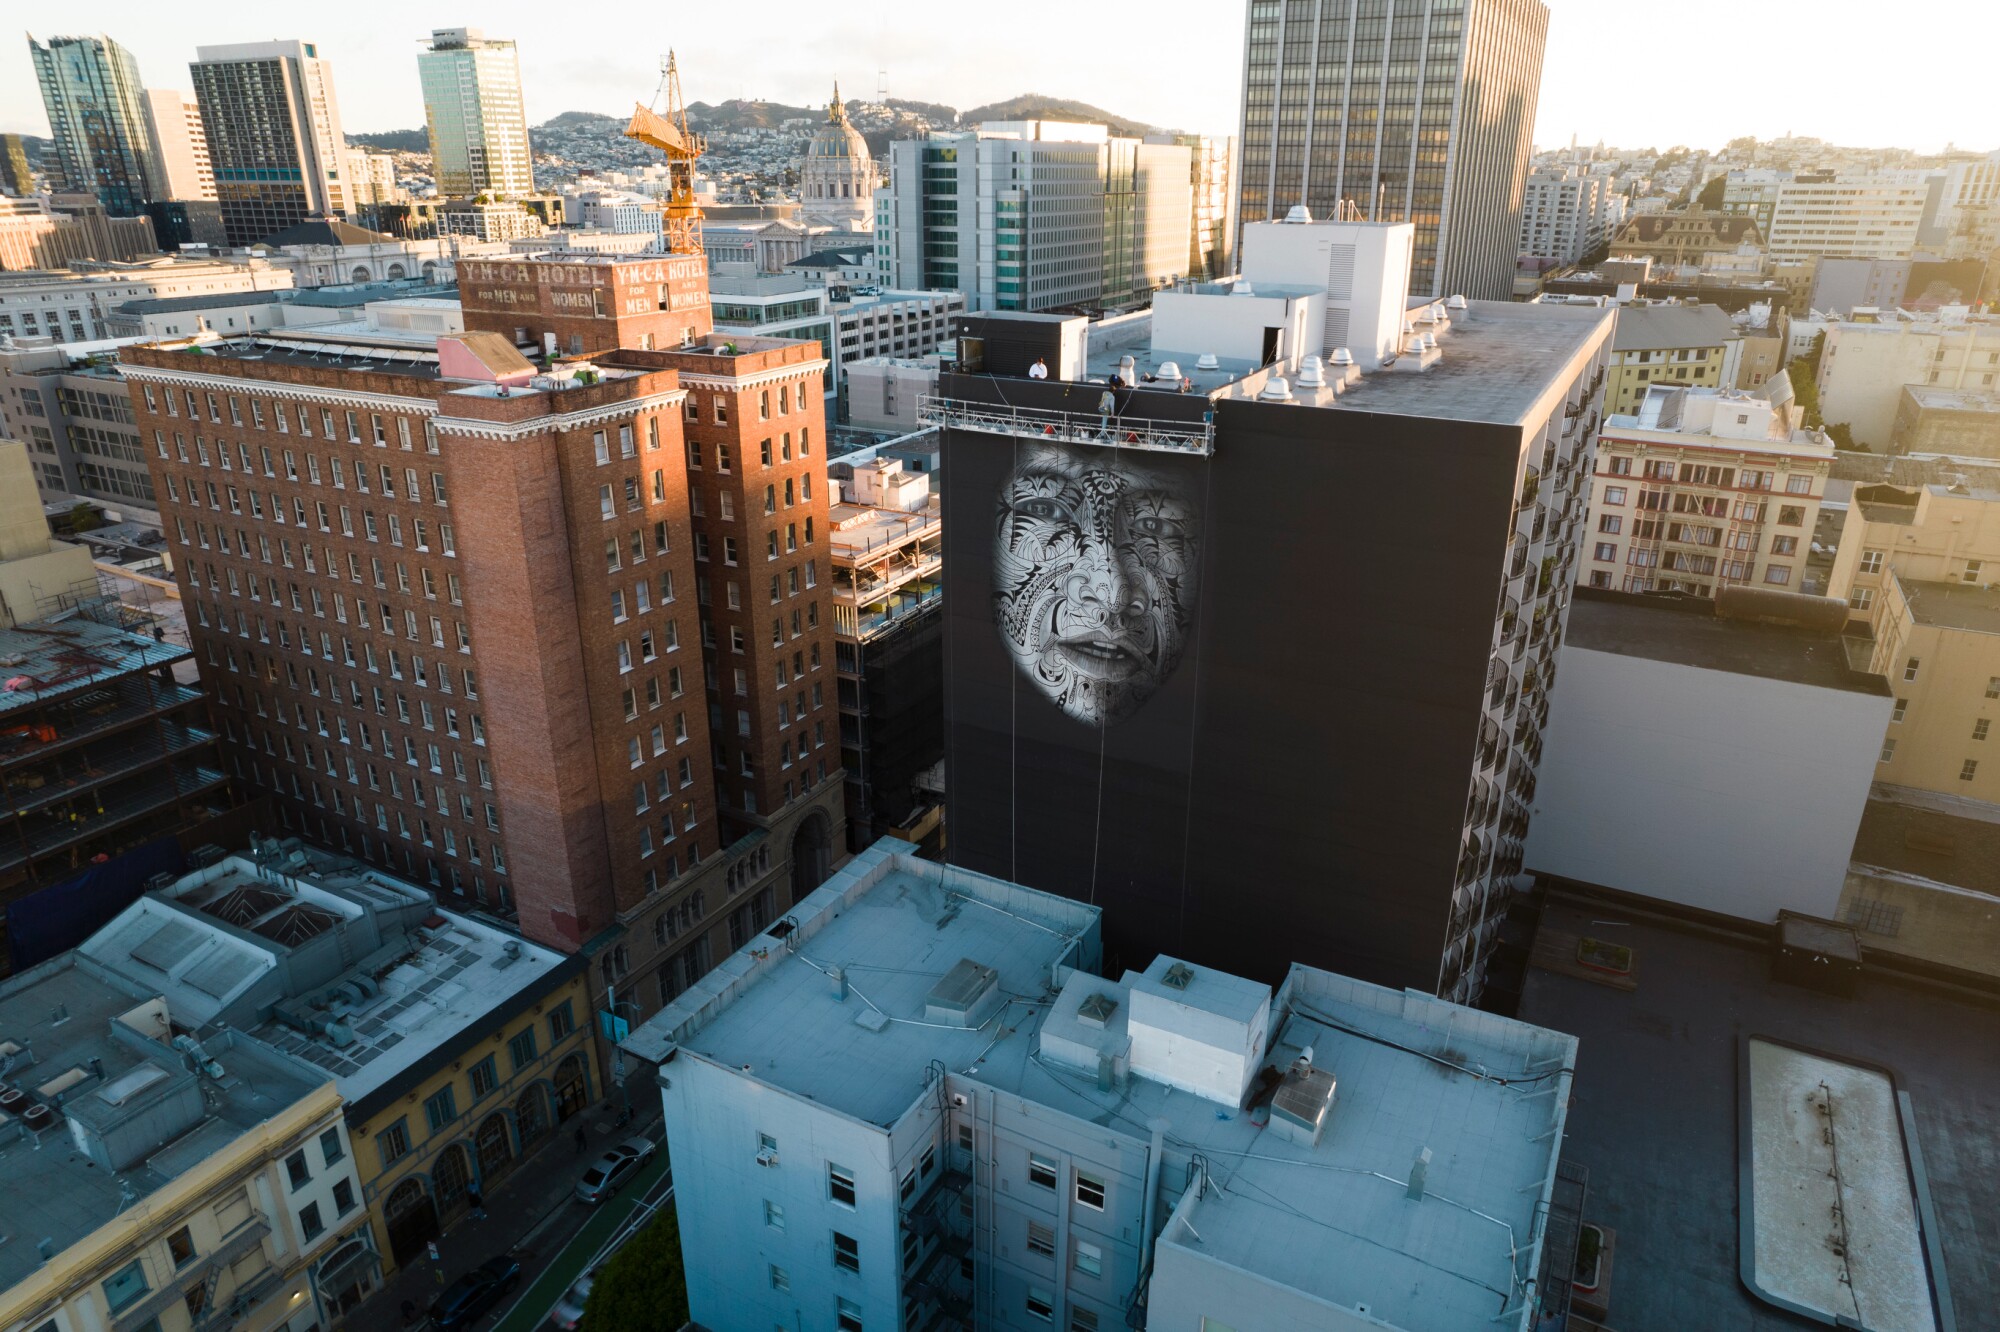 An aerial view shows a building facade painted black, from which emerges a tattooed face — from a work by Carlos Villa.